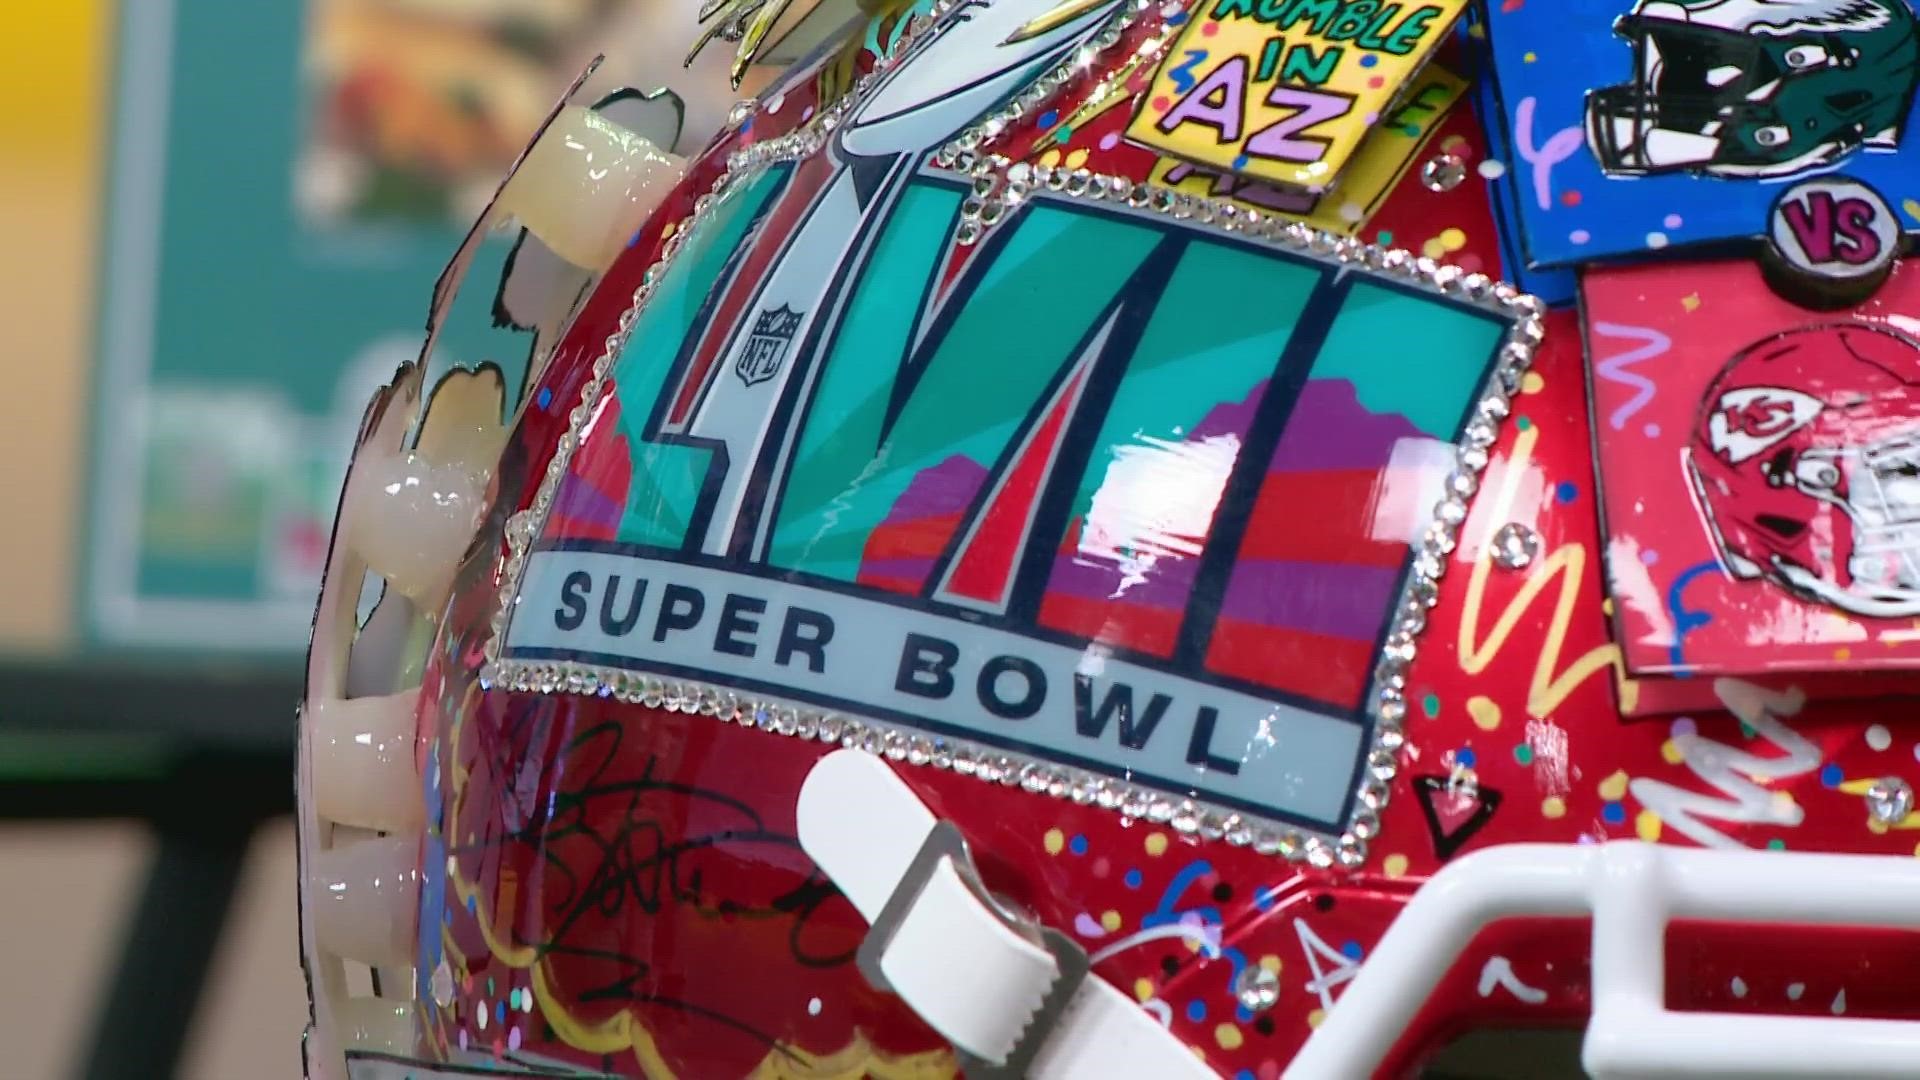 Here's what next year's Super Bowl logo will look like